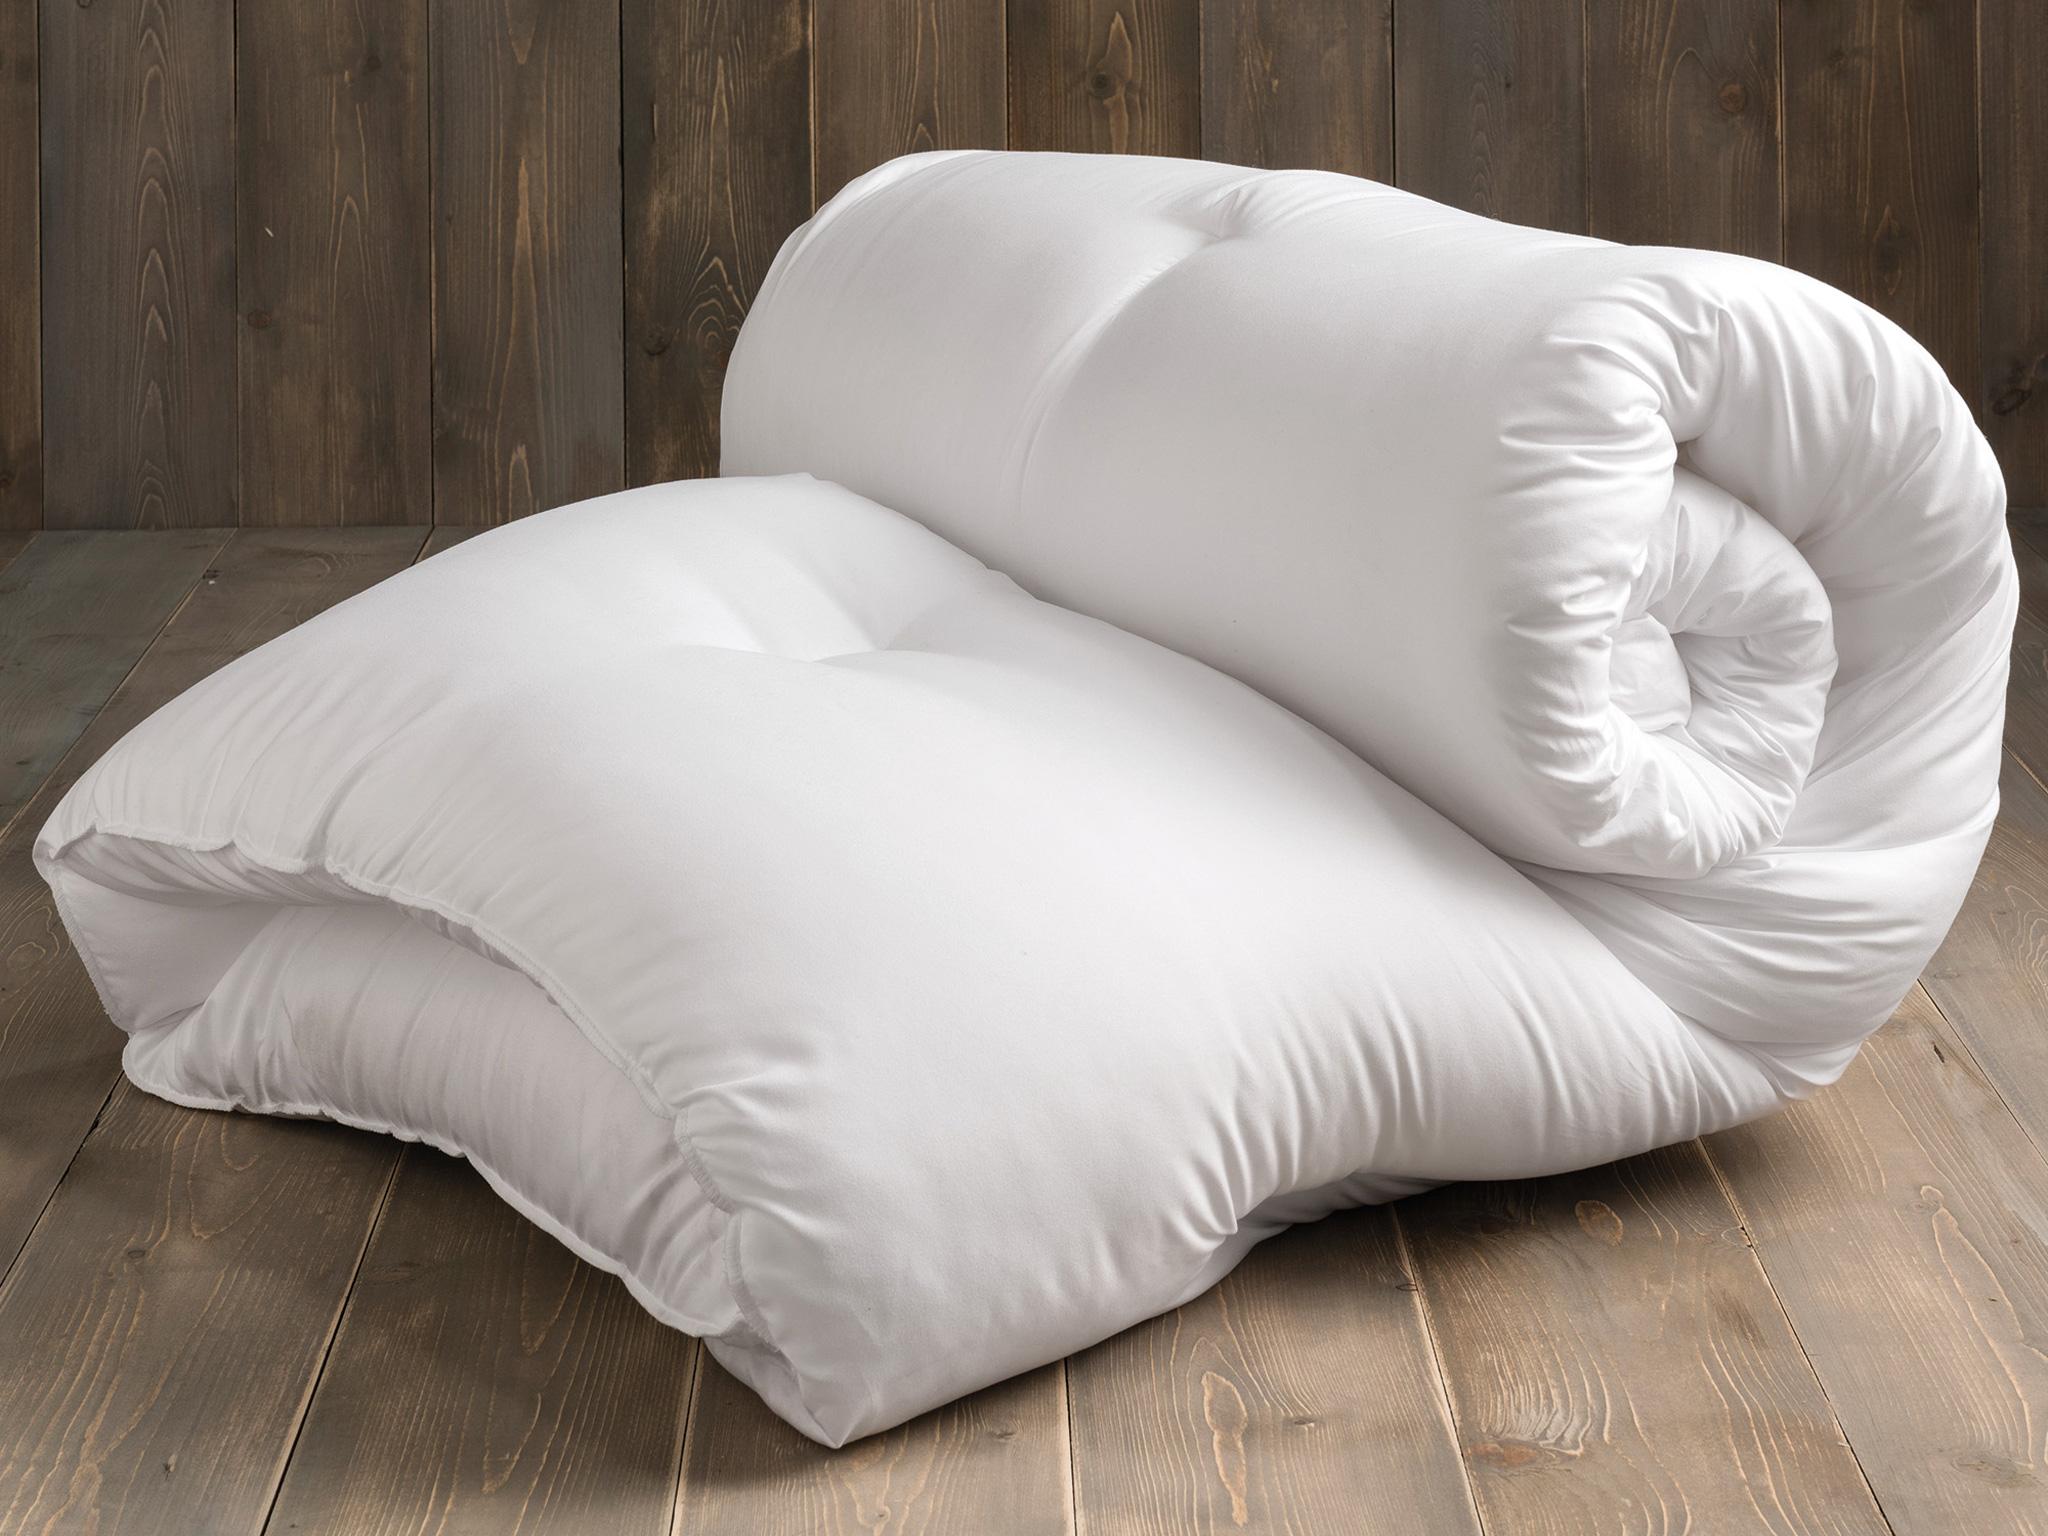 13 Best Winter Duvets The Independent